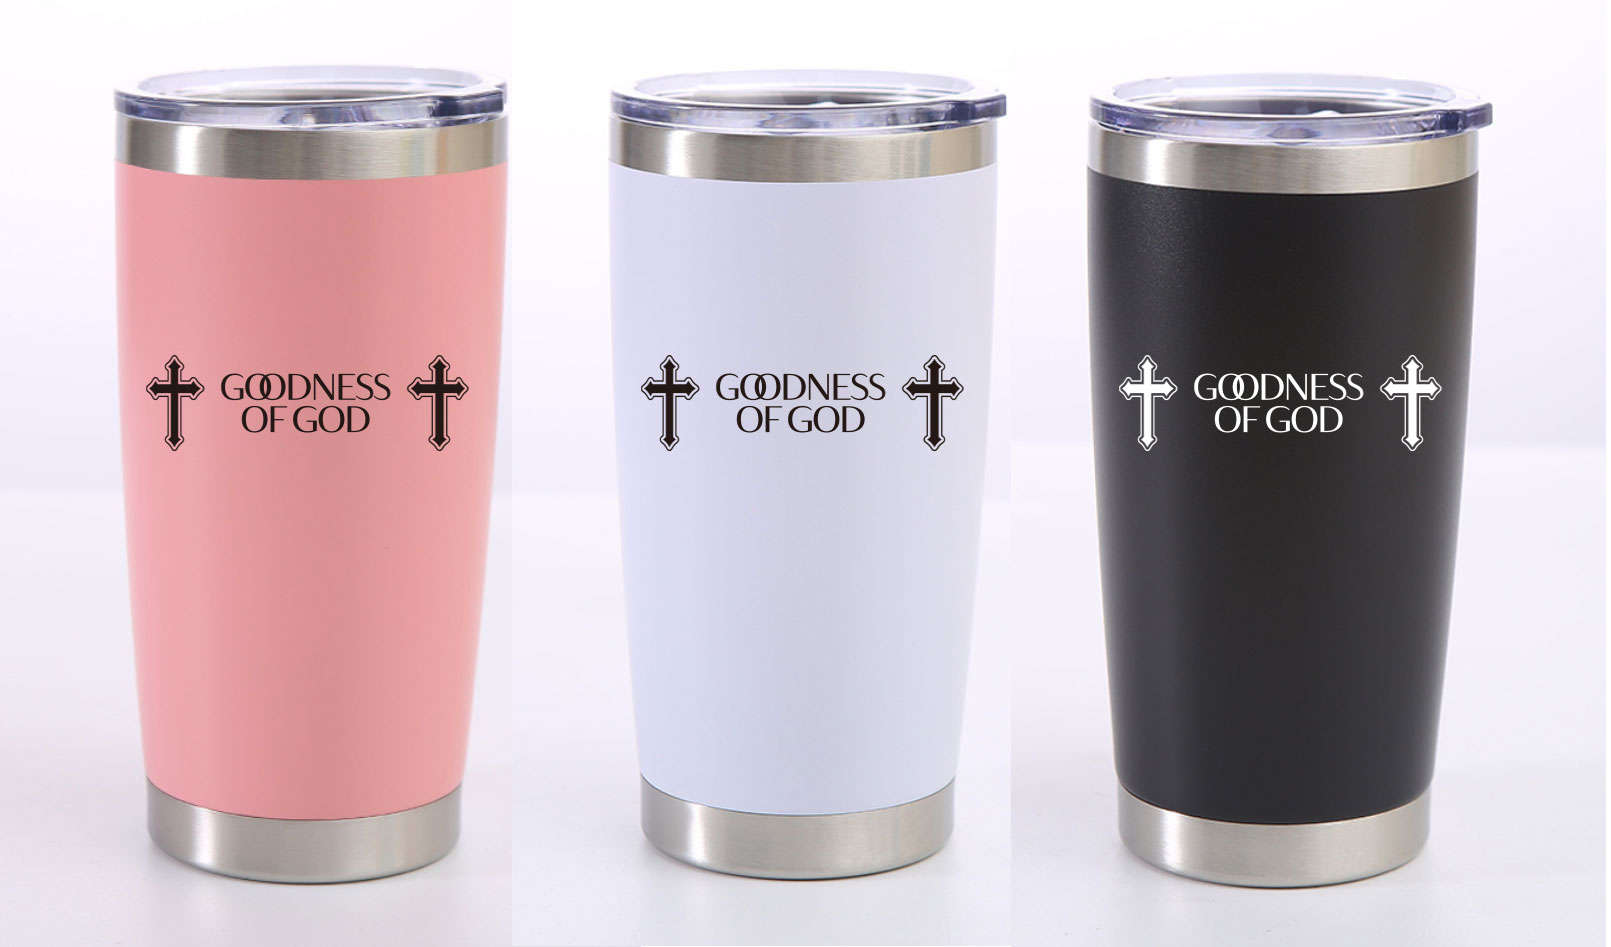 God double wall vacuum stainless steel coffee travel mug tumbler gifts